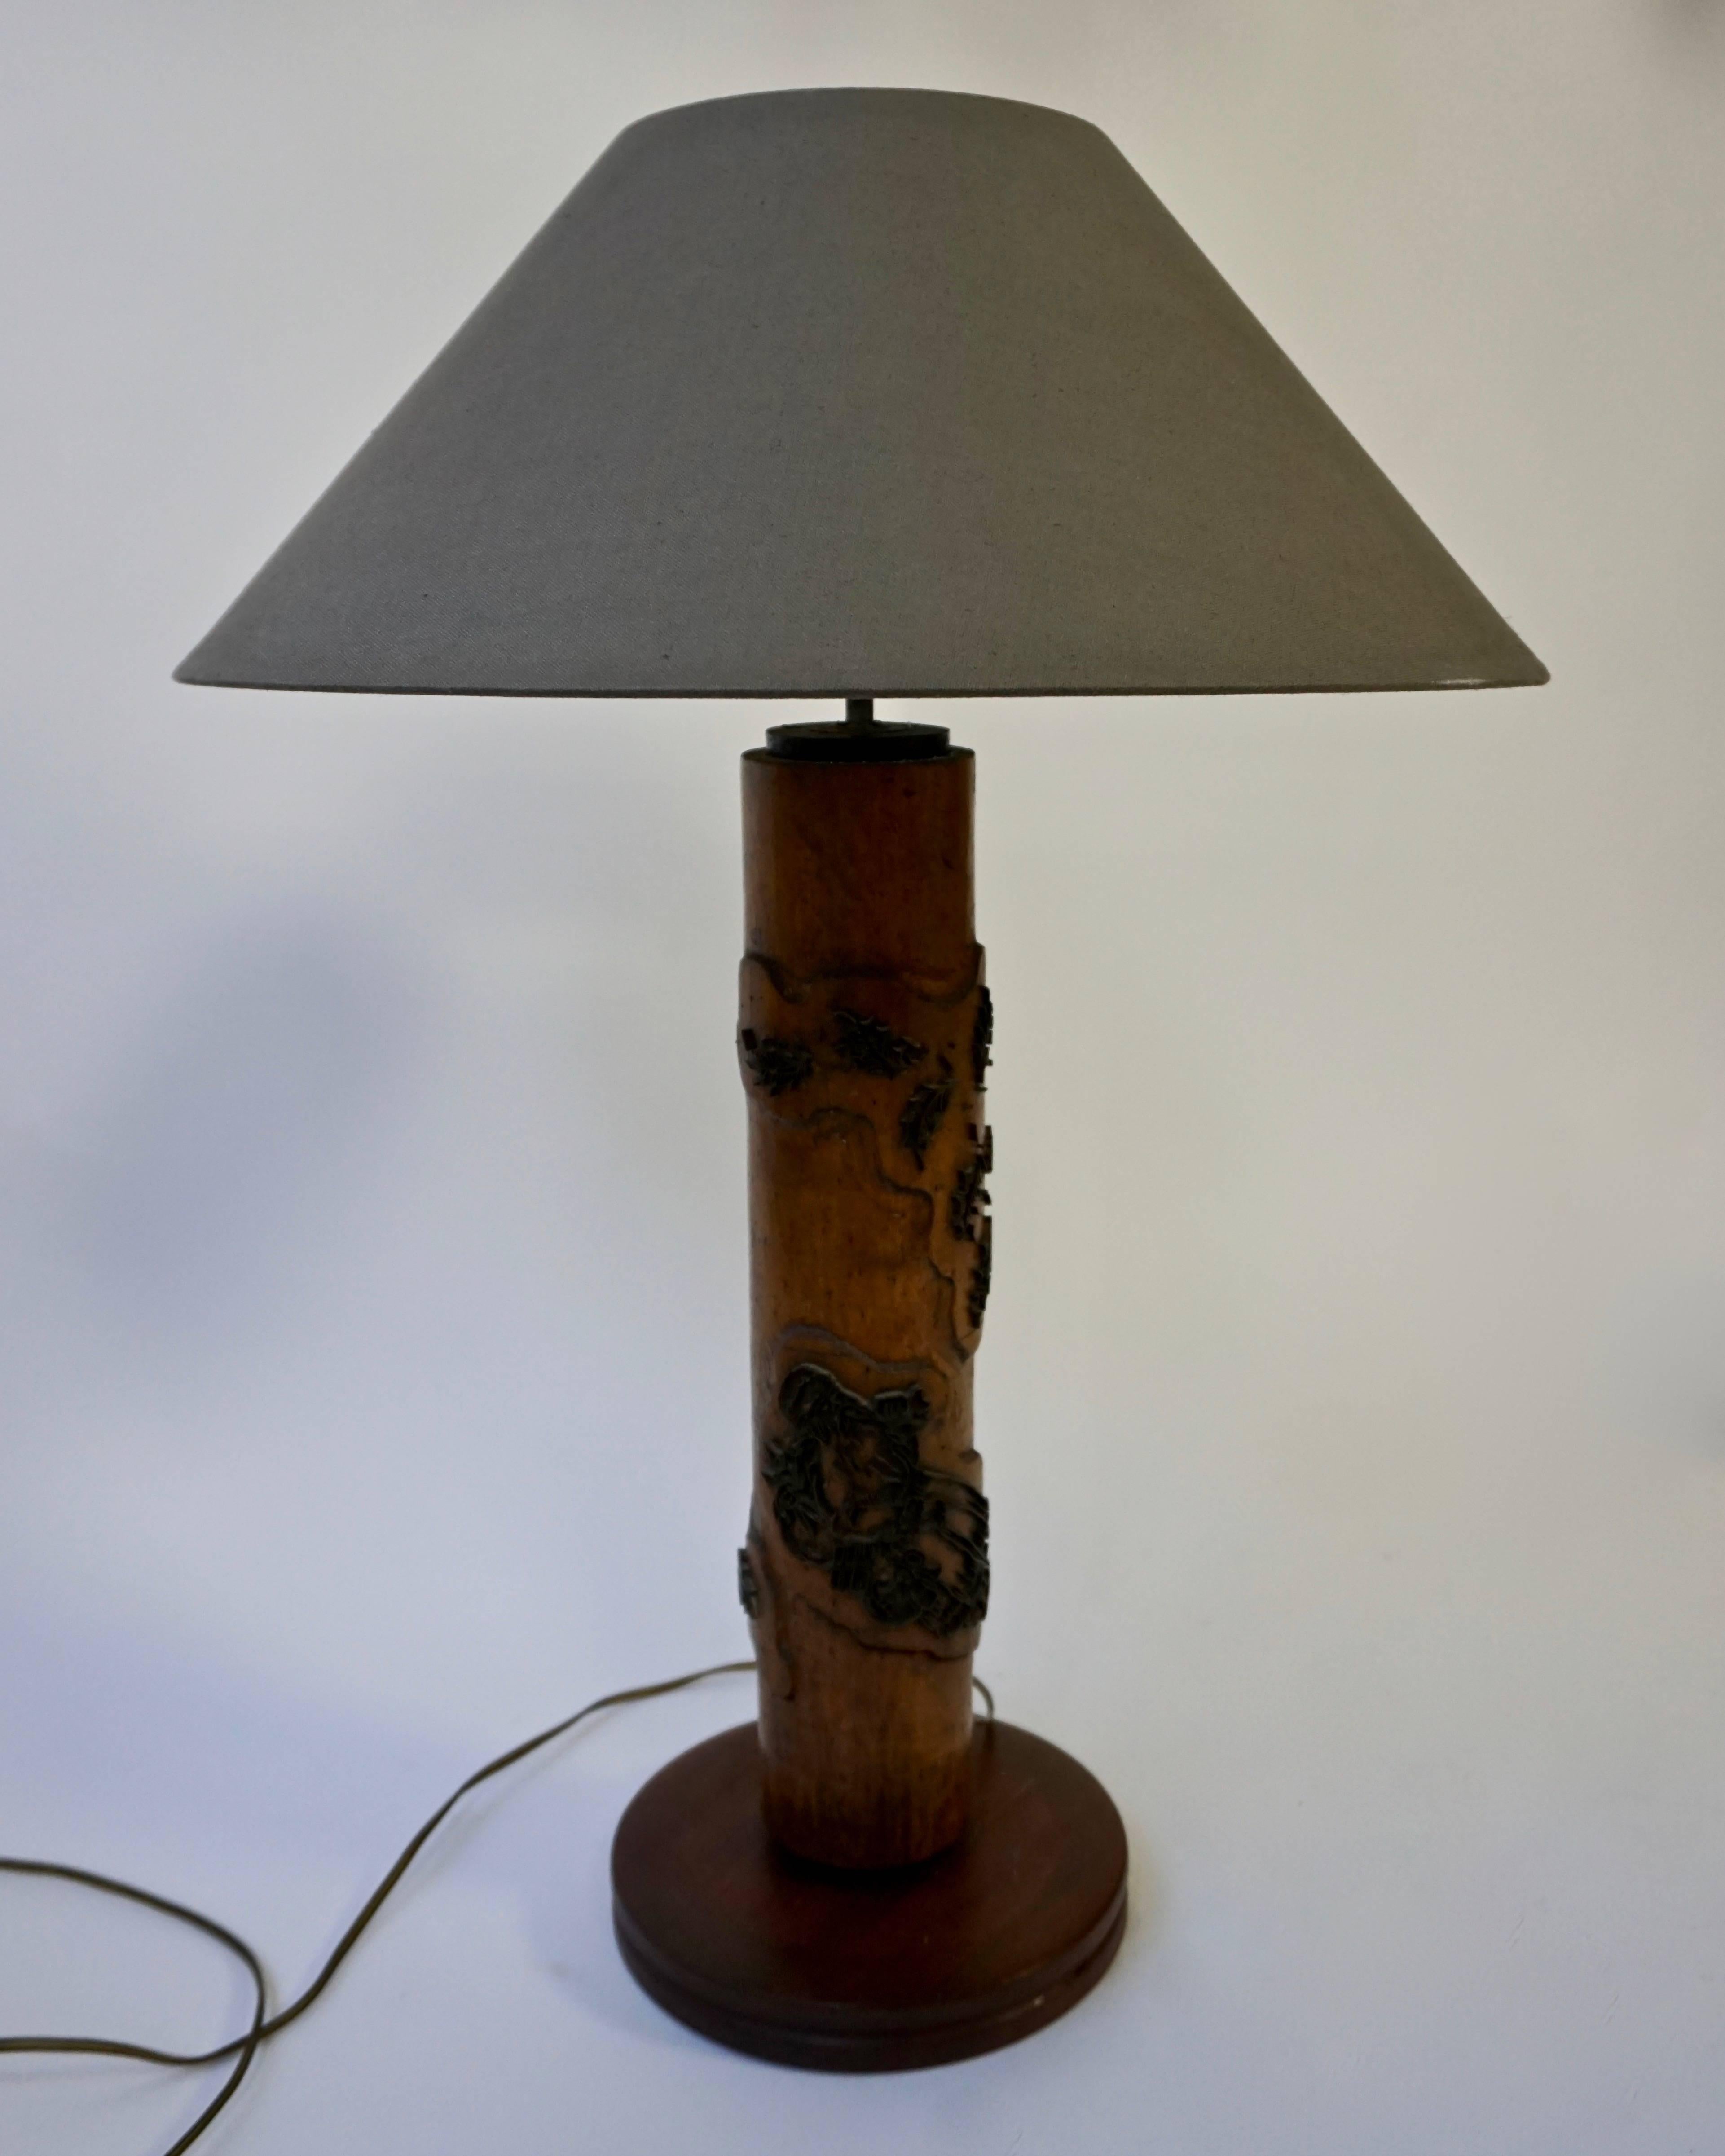 Table lamp.
Measures: Height with shade 80 cm.
Diameter shade 56 cm.
Height base with socket 64 cm.(Without socket 56 cm)
Diameter base 20 cm. 

Shade is not included in the price.
      